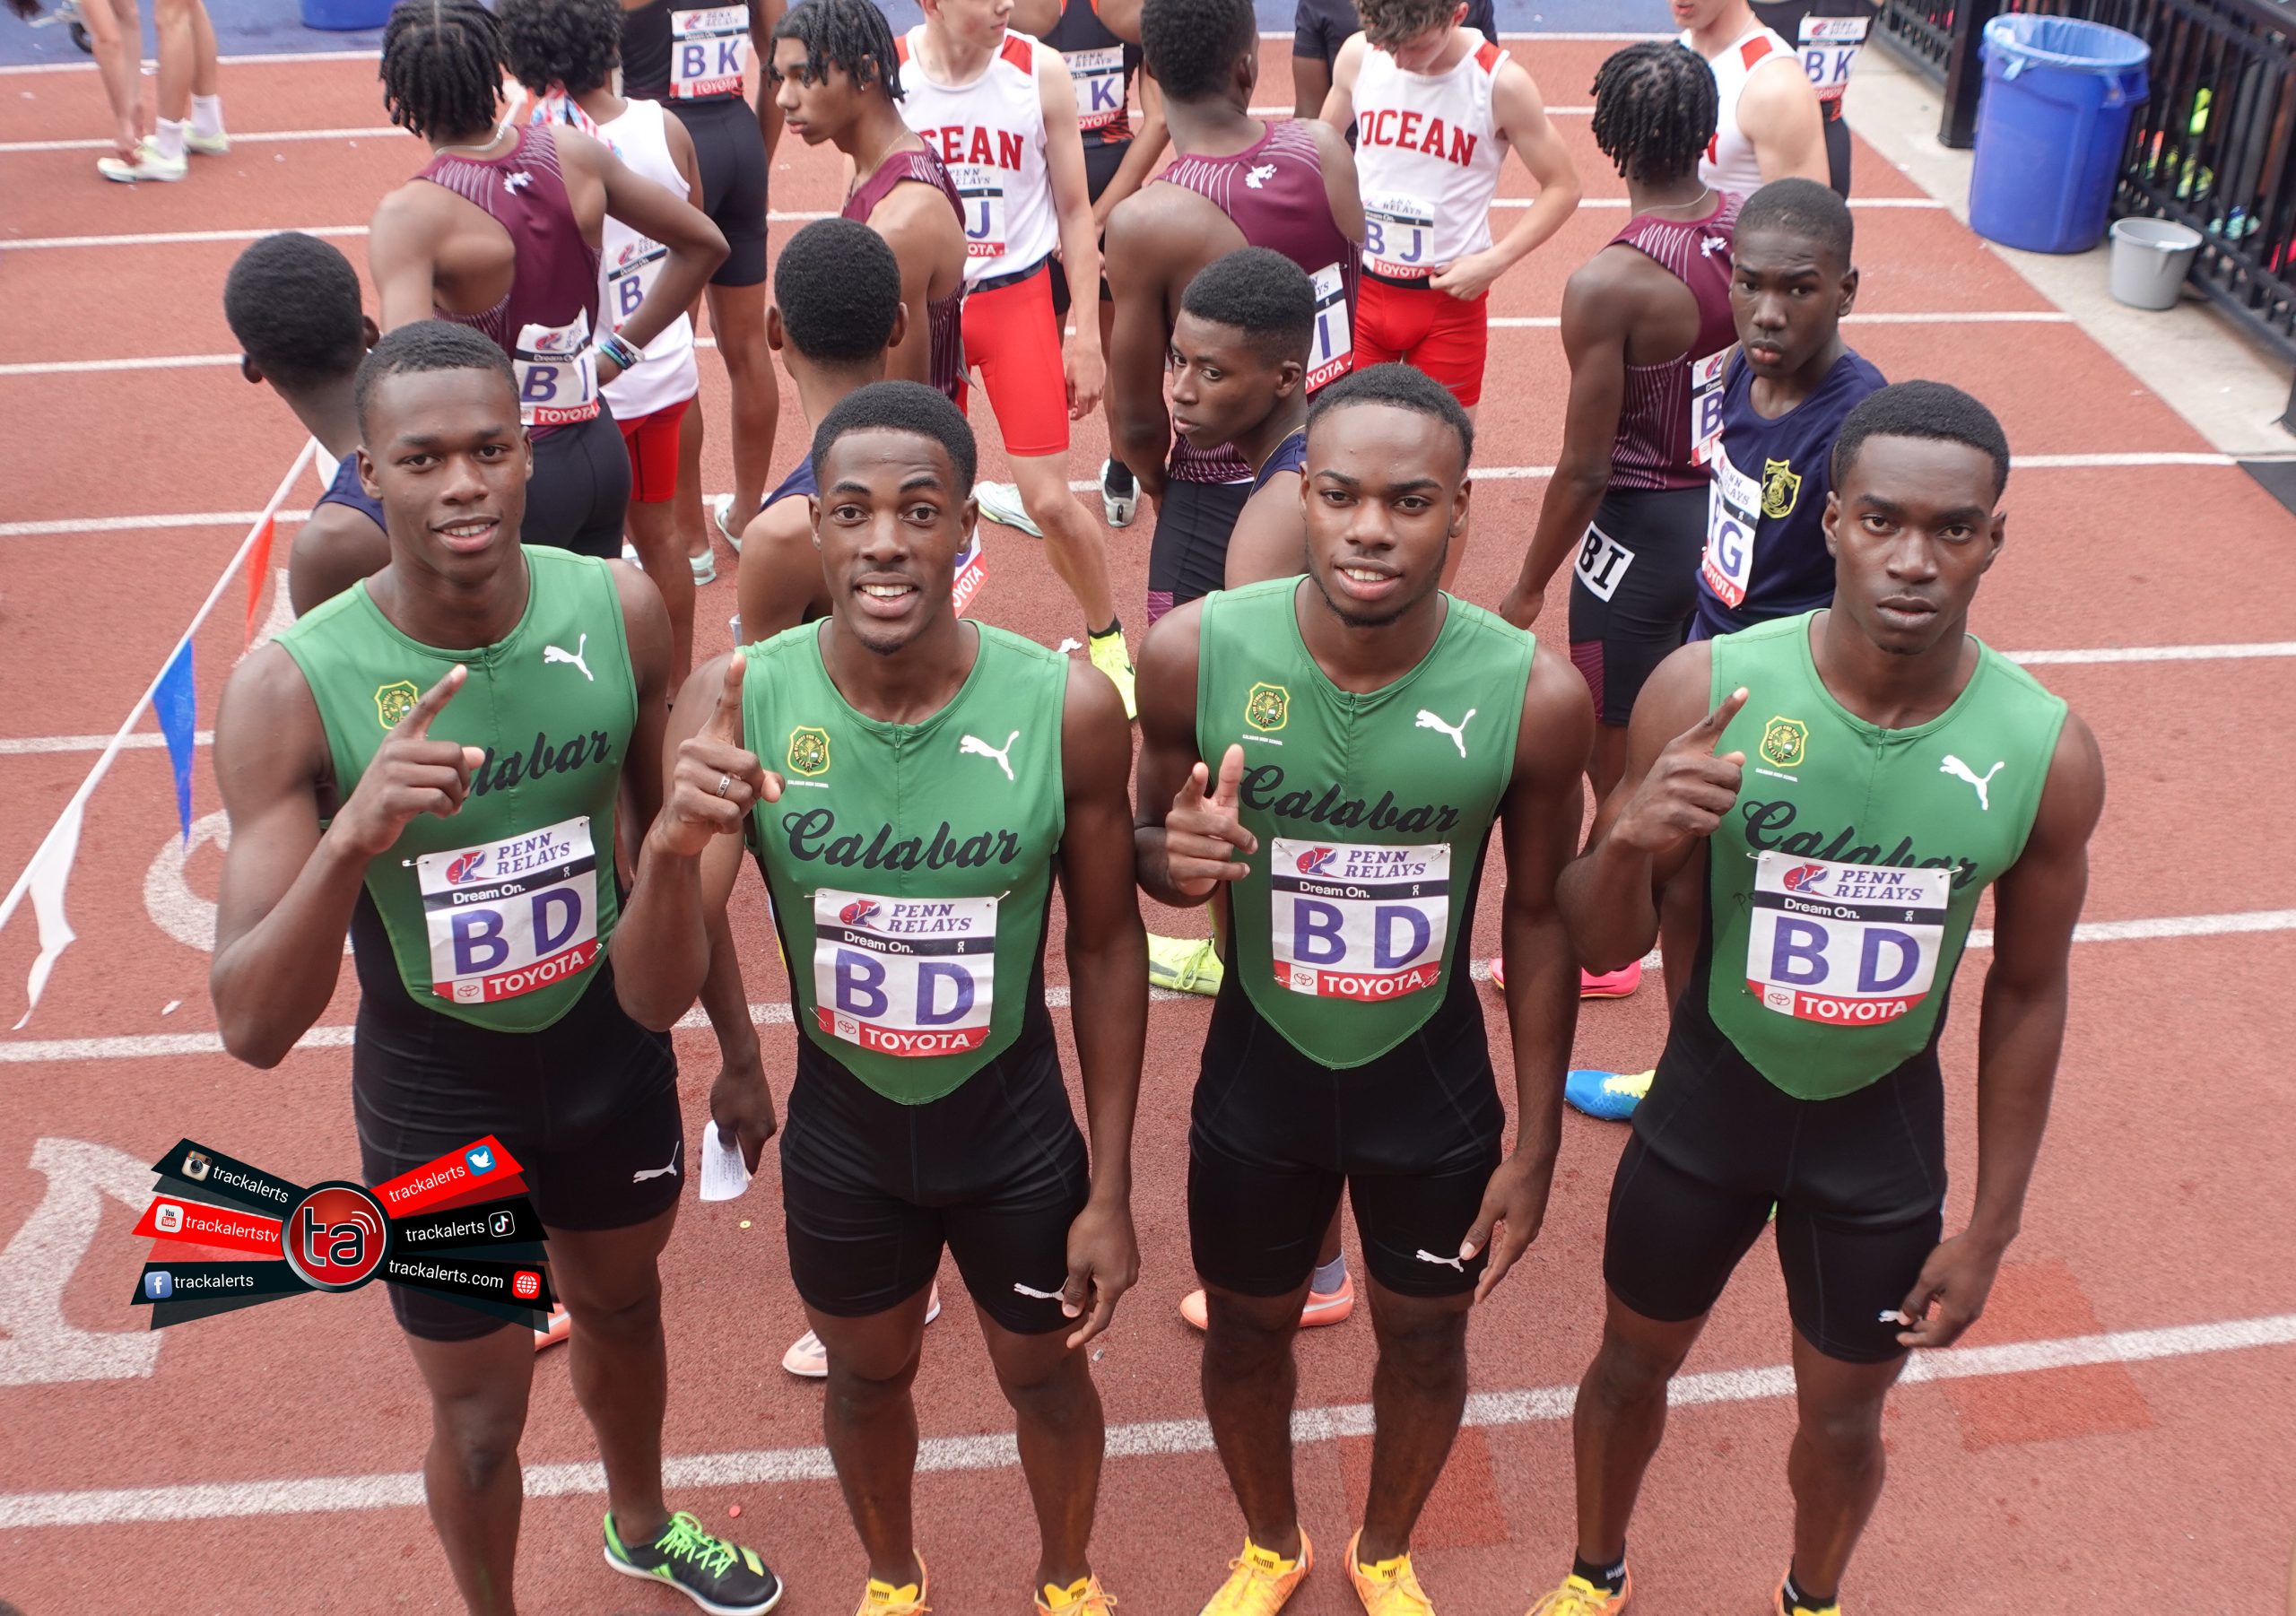 Calabar sets the pace and qualifies for the High School Boys' 4x400 Championship of America at Penn Relays 2023! 🏃‍♂️🏆 #trackandfield #pennrelays #highschoolsports #calabar